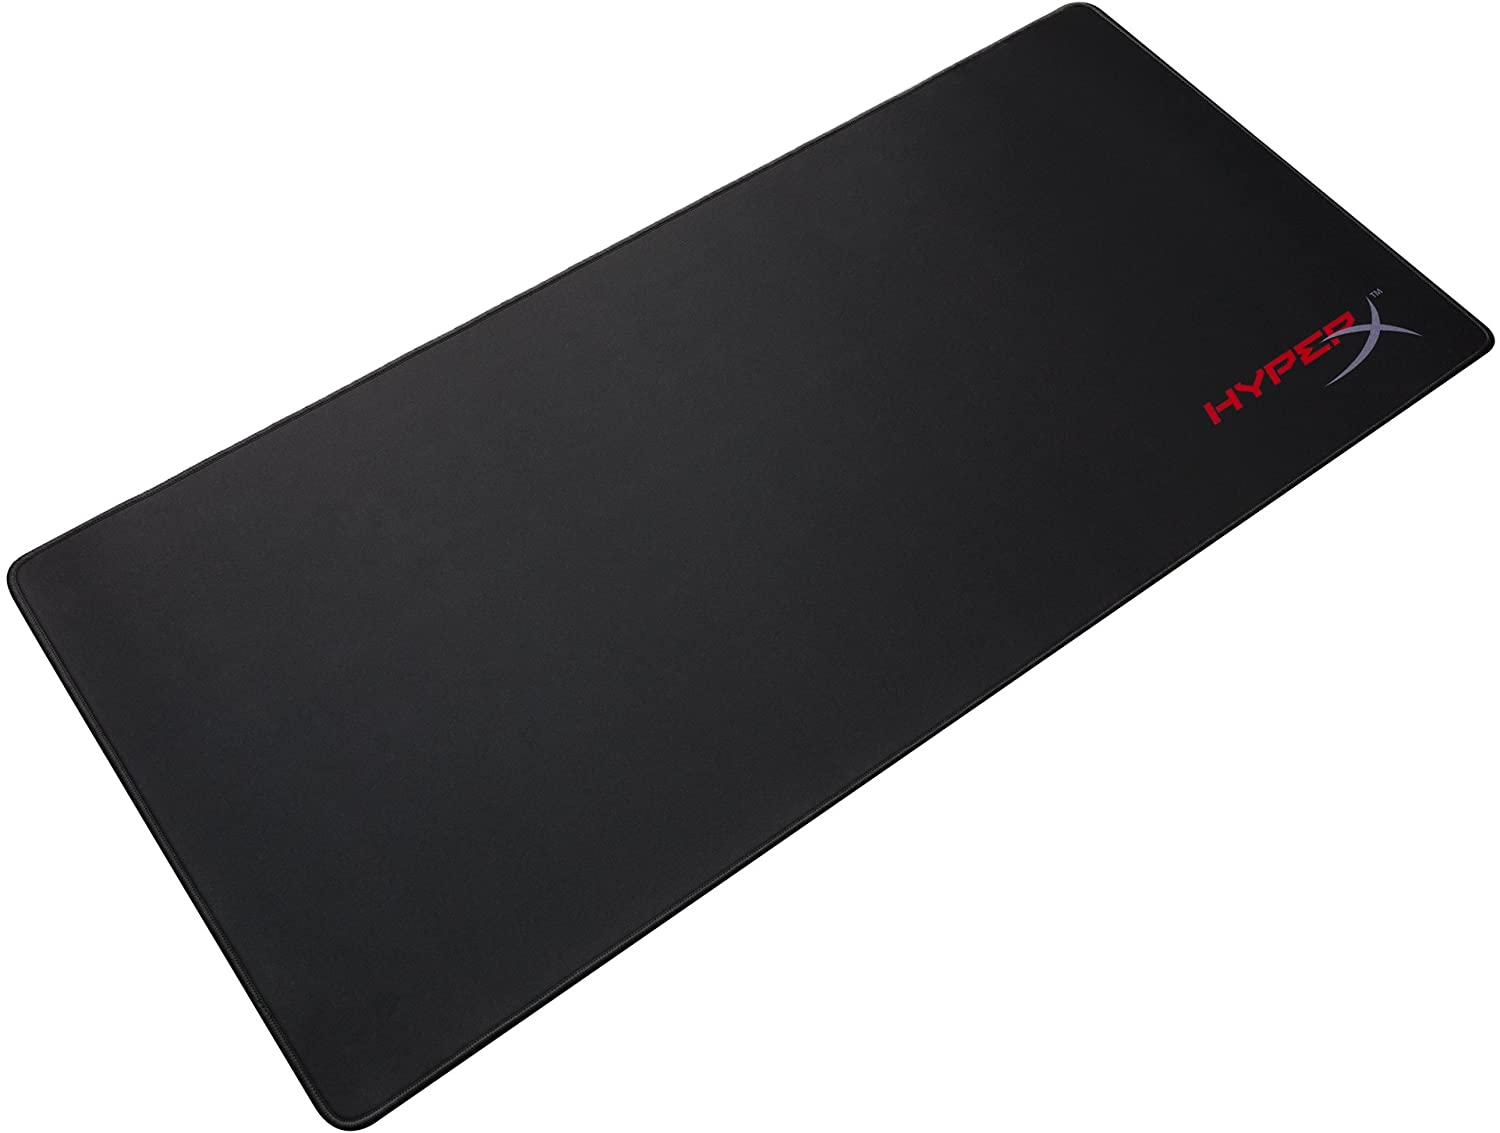 HyperX Fury S - Pro Gaming Mouse Pad, Cloth Surface Optimized for Precision, Stitched Anti-Fray Edges, X-Large 900x420x4mm - Pro-Distributing